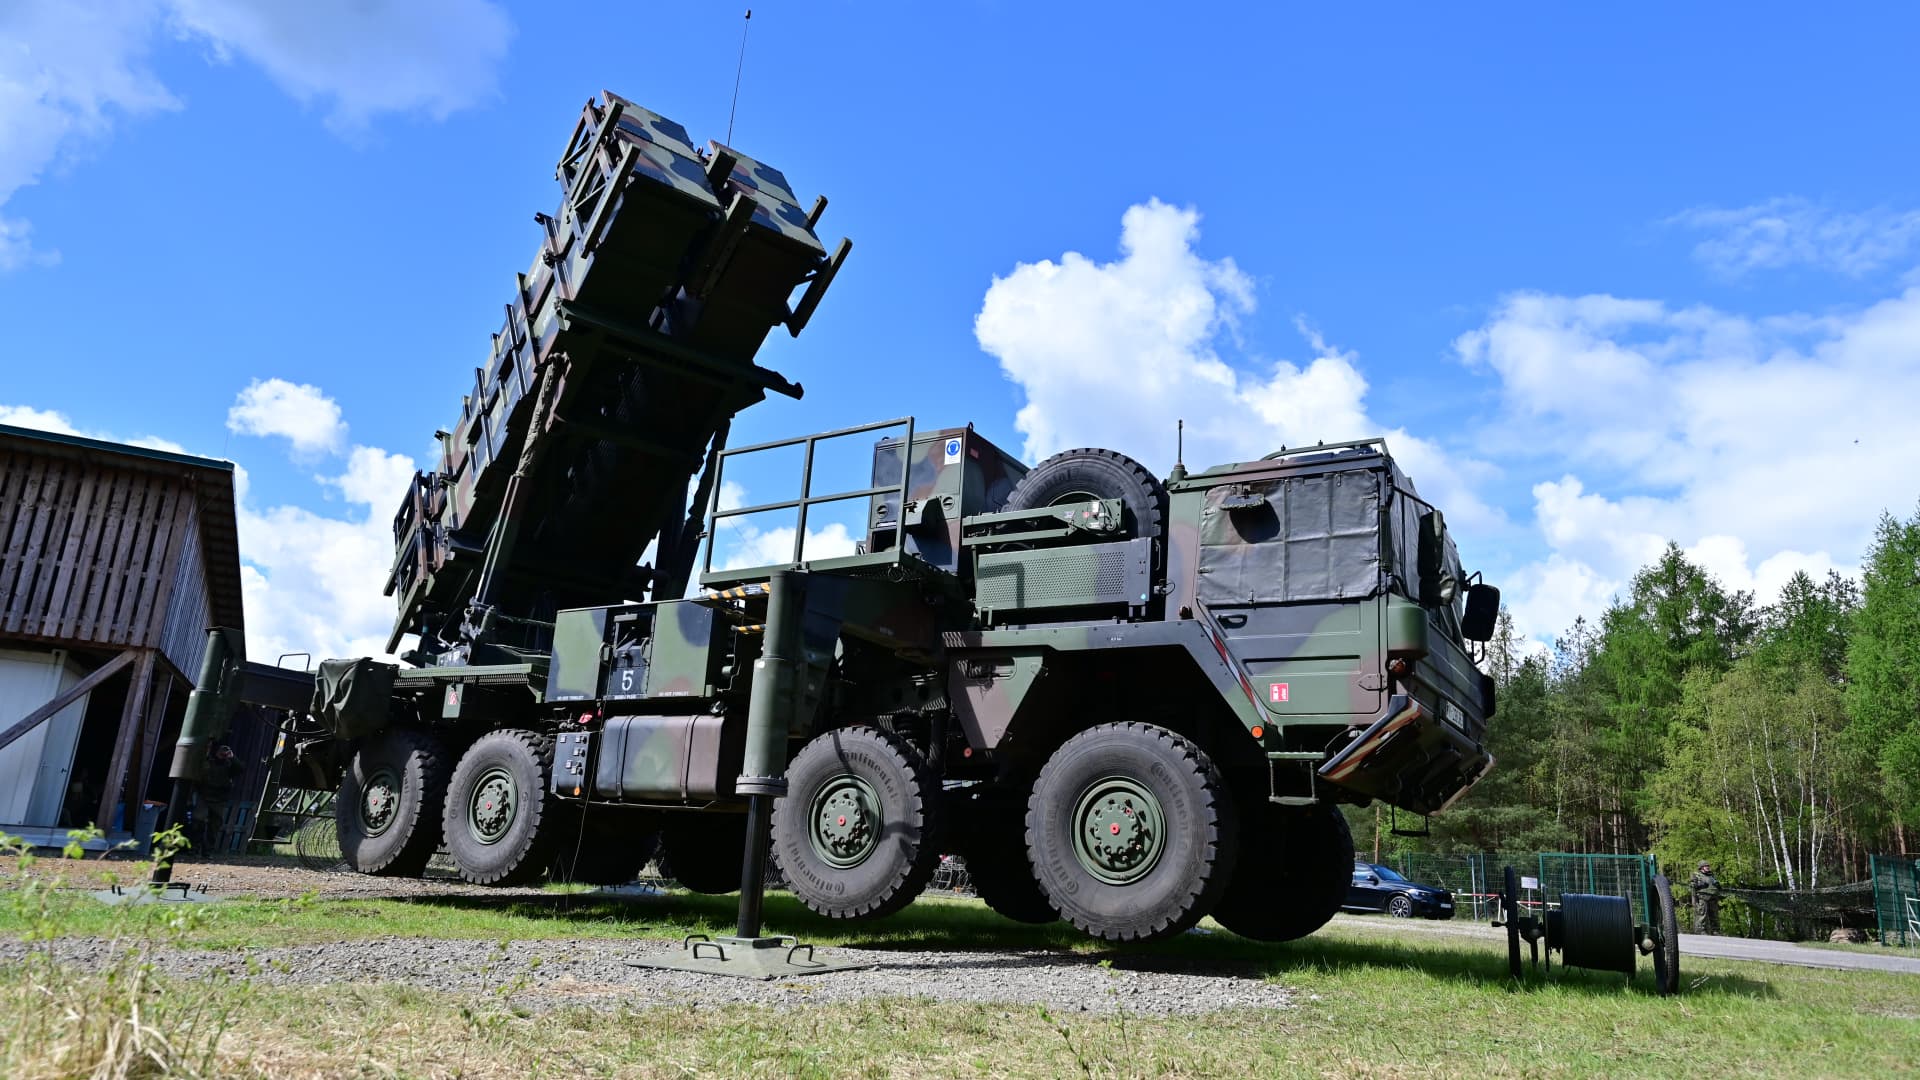 A Patriot anti-aircraft missile system during the National Guardian exercise at the tank training school on the Munster military training area.